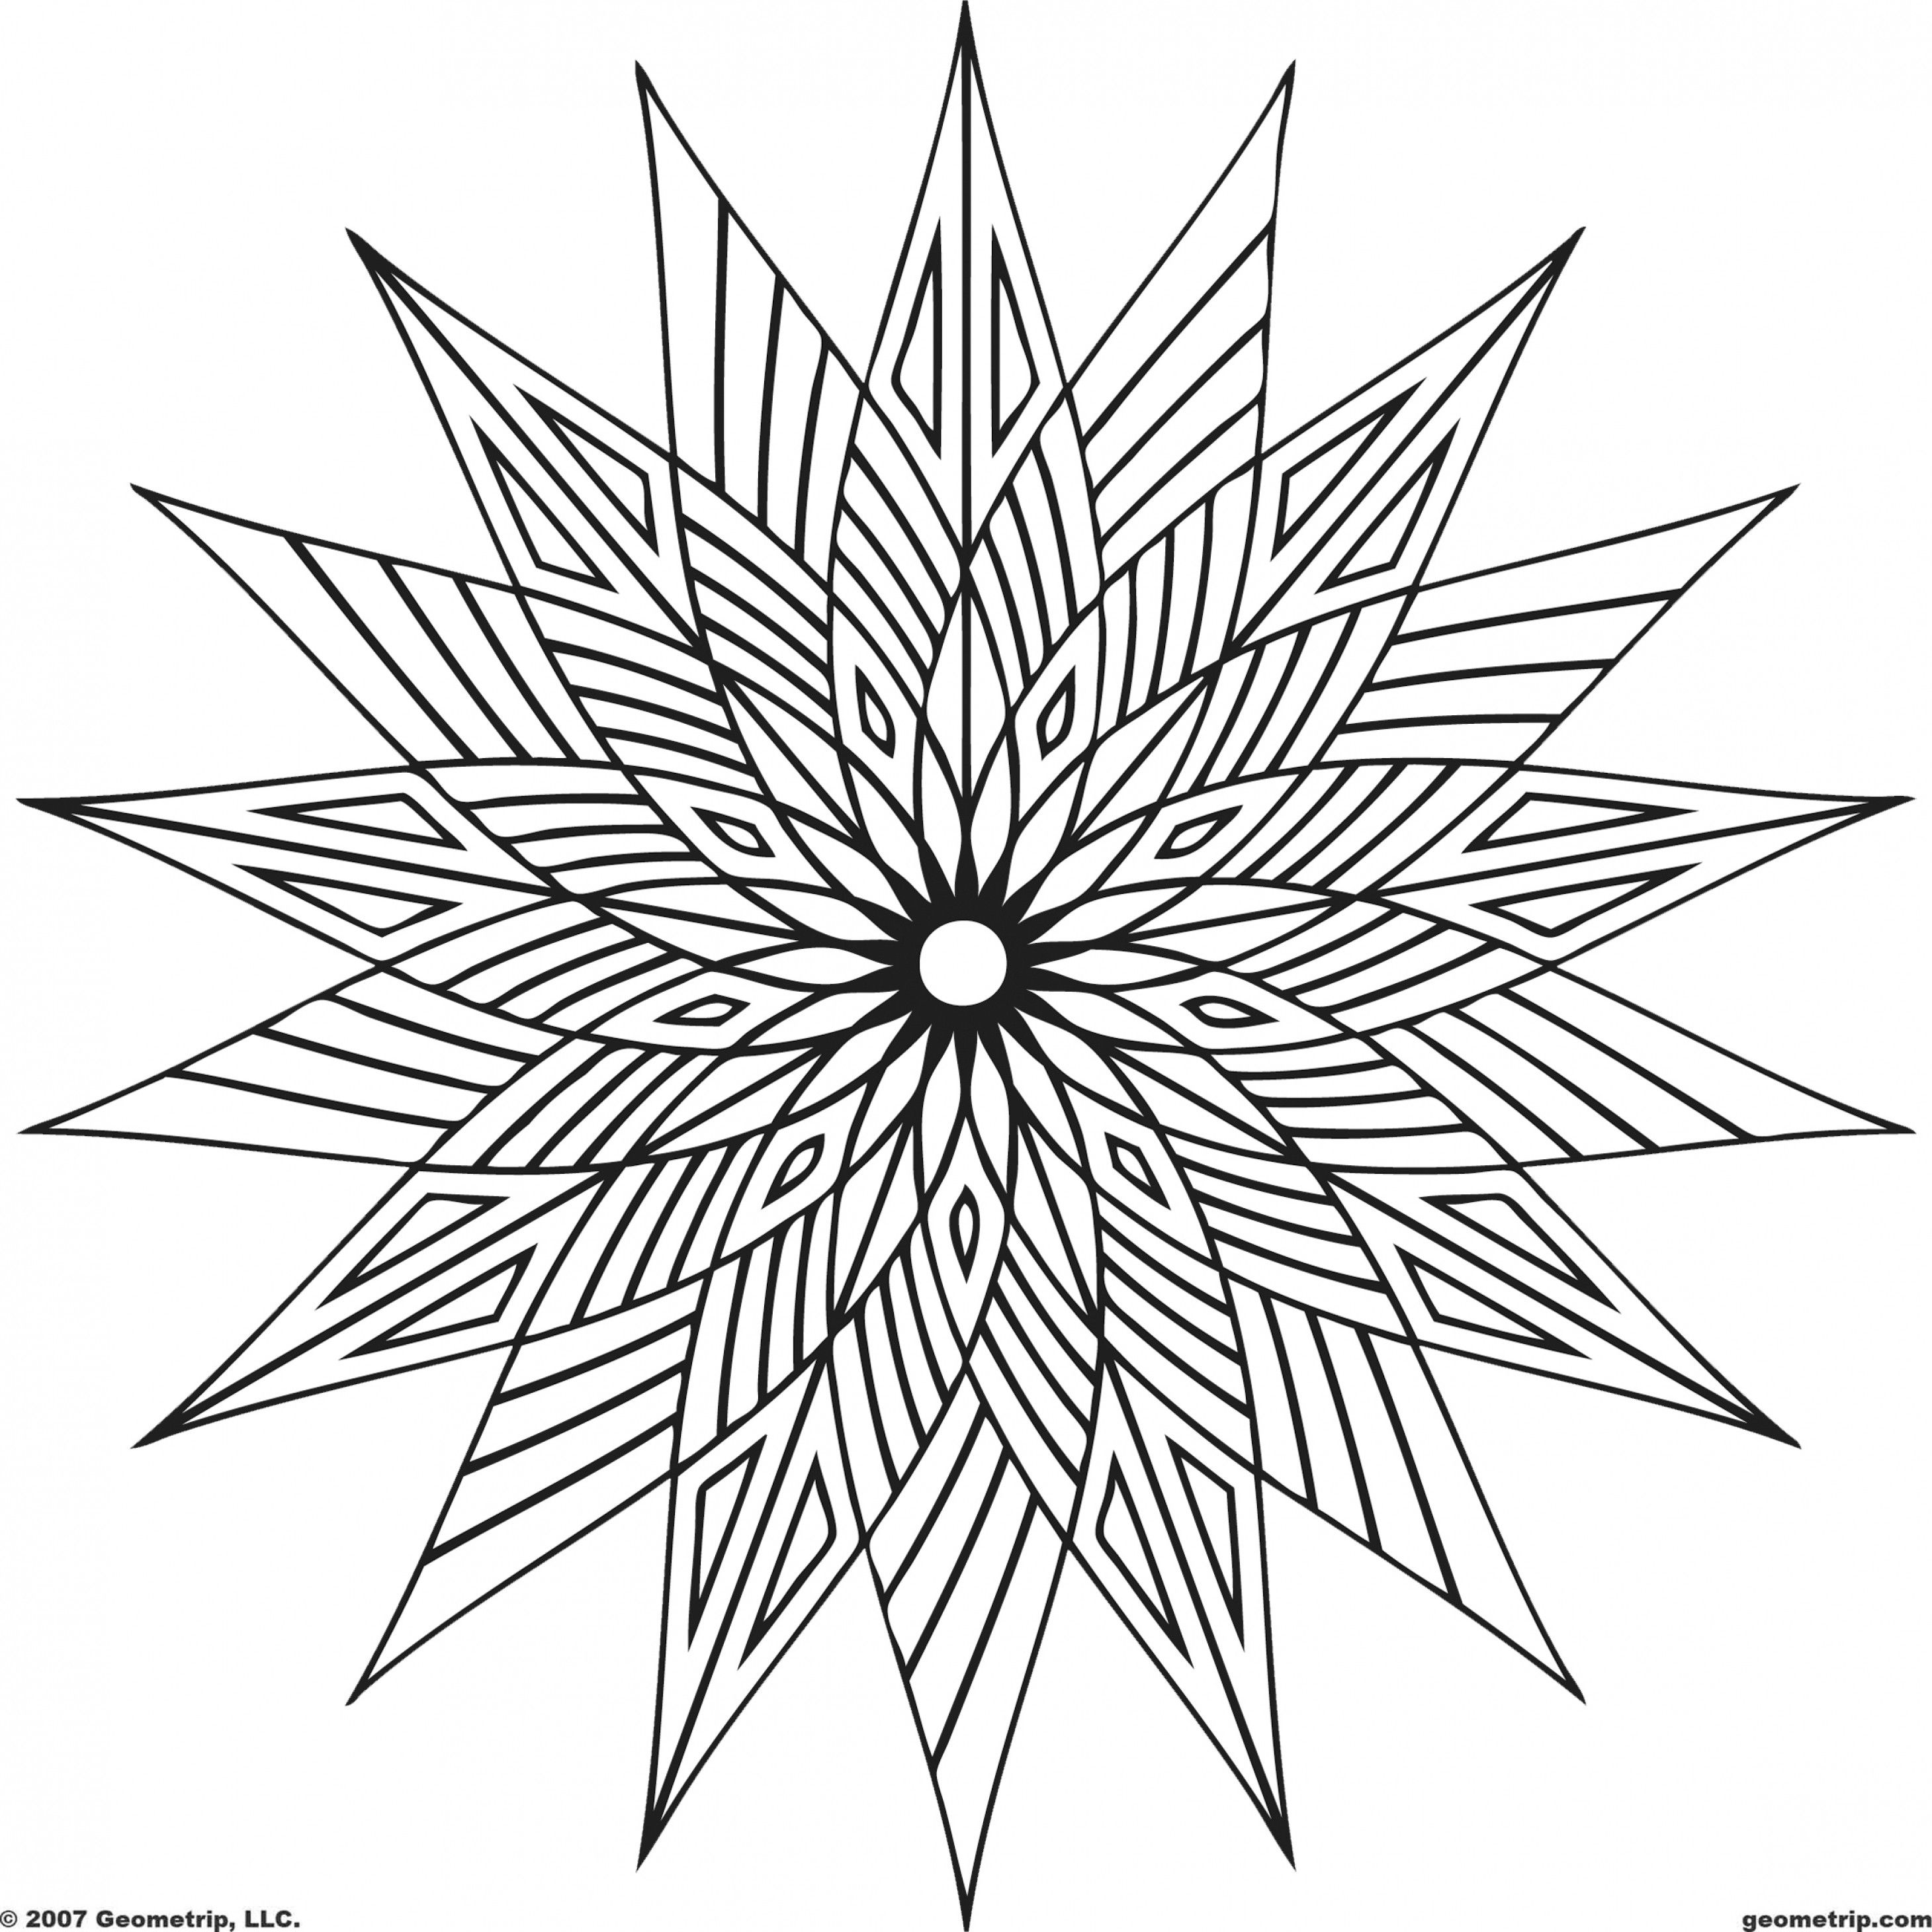 Printable Designs To Color - Coloring Pages for Kids and for Adults